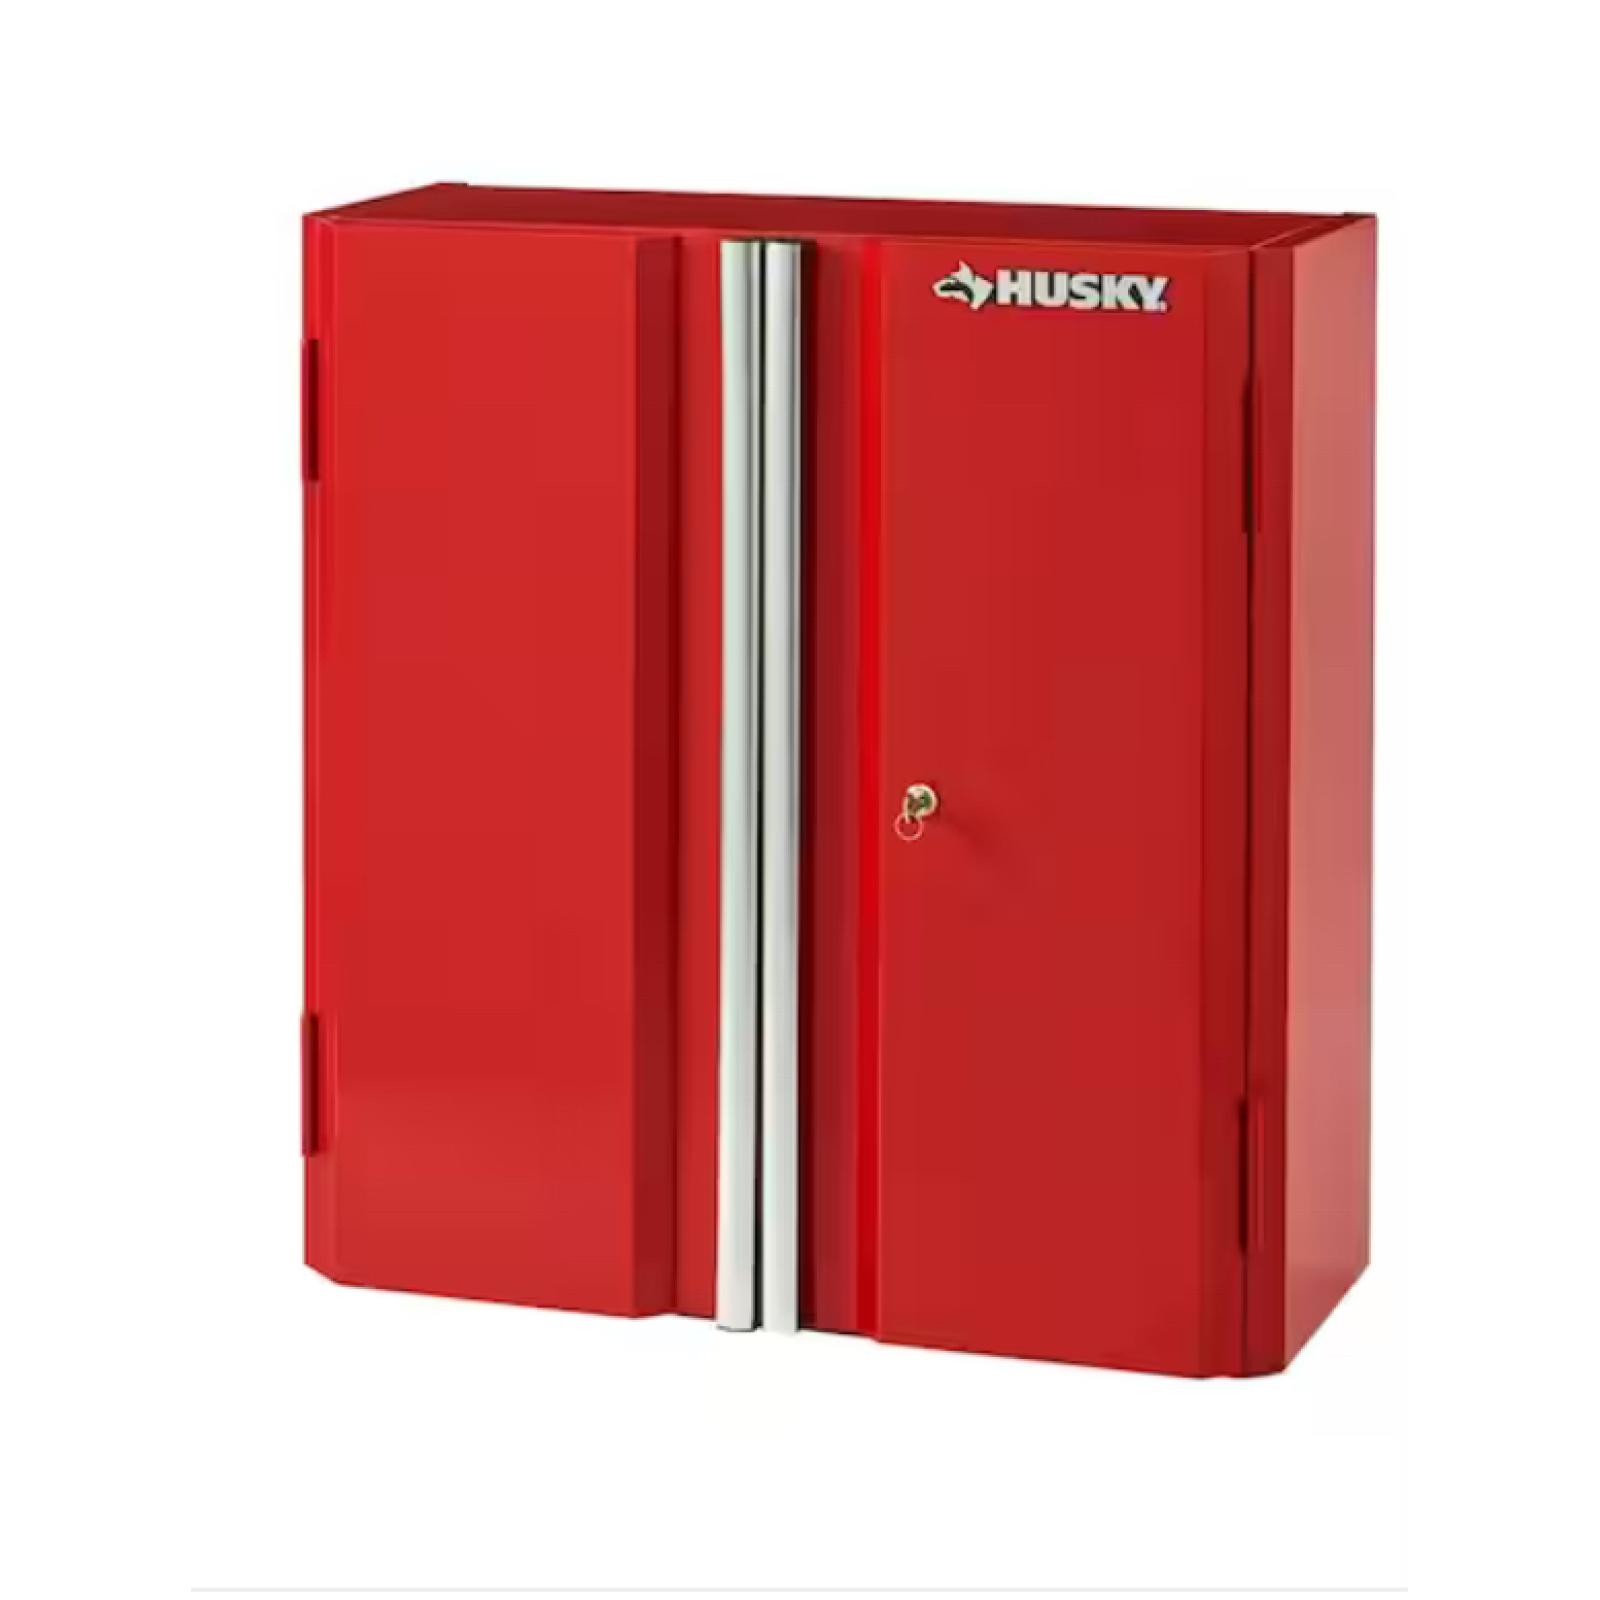 NEW! 4- Husky Ready-to-Assemble 24-Gauge Steel Wall Mounted Garage Cabinet in Red